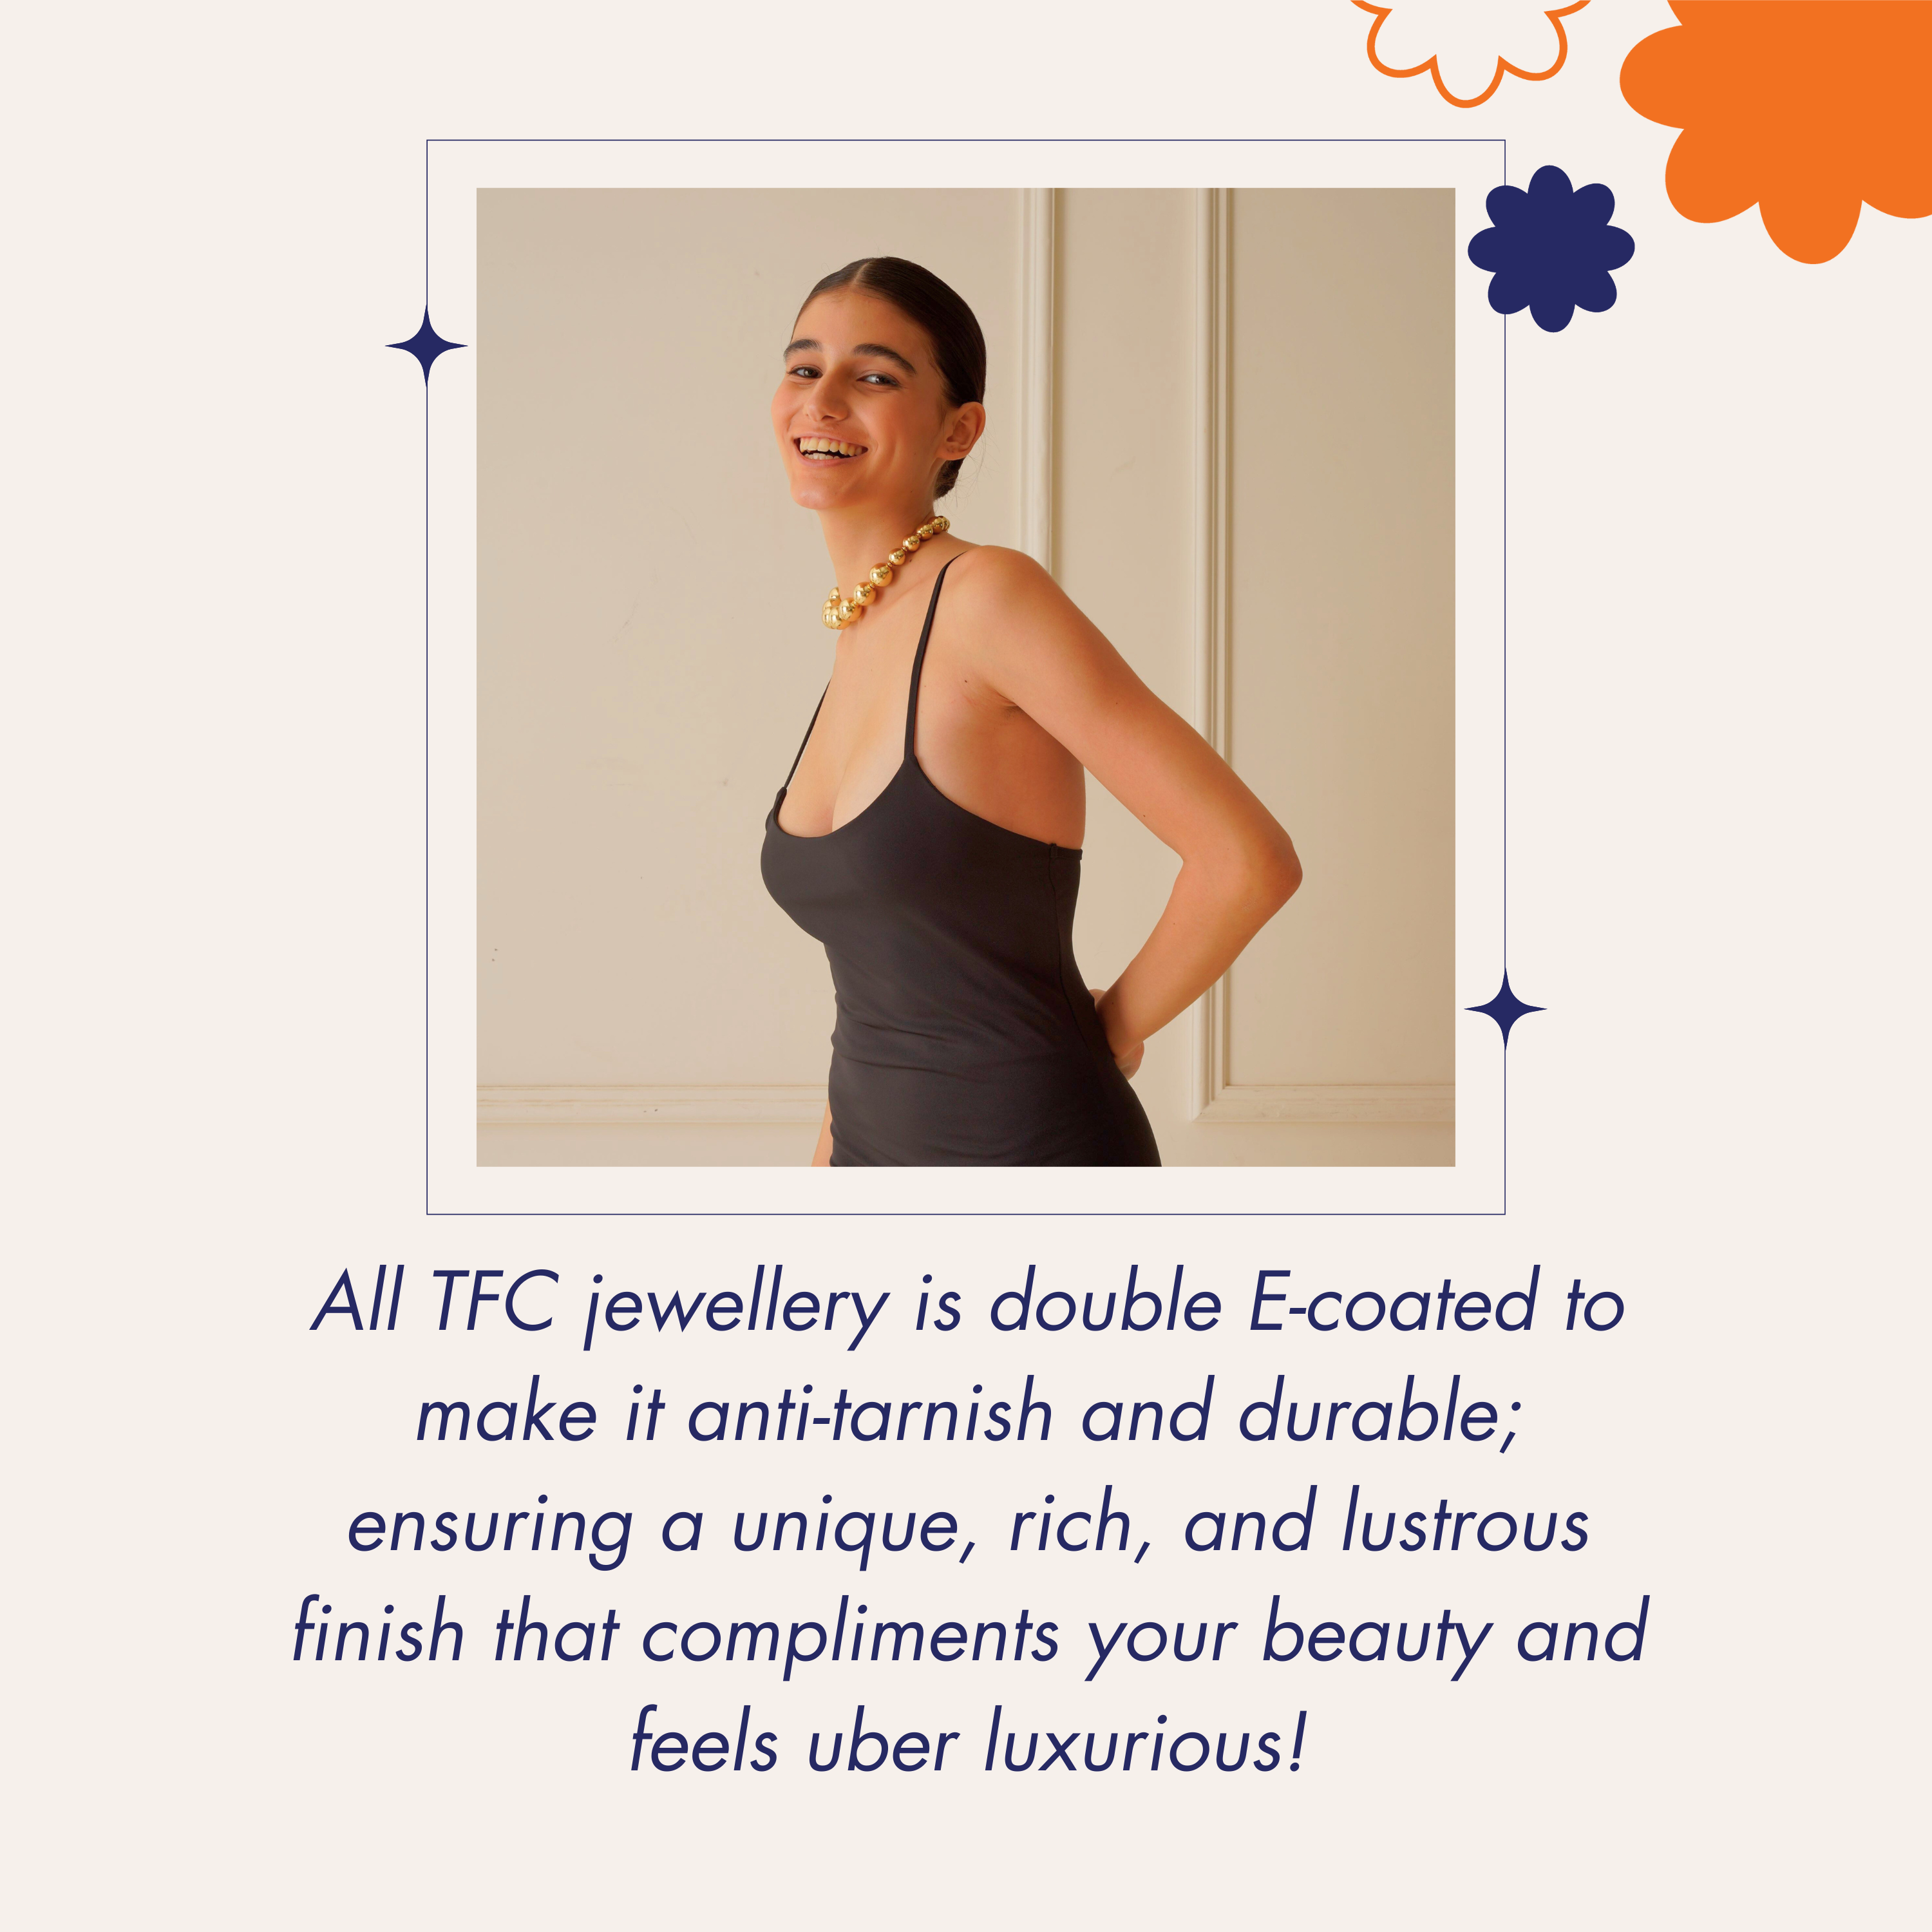 TFC Festive stunner gold earrings-Discover daily wear gold earrings including stud earrings, hoop earrings, and pearl earrings, perfect as earrings for women and earrings for girls.Find the cheapest fashion jewellery which is anti-tarnish only at The Fun company